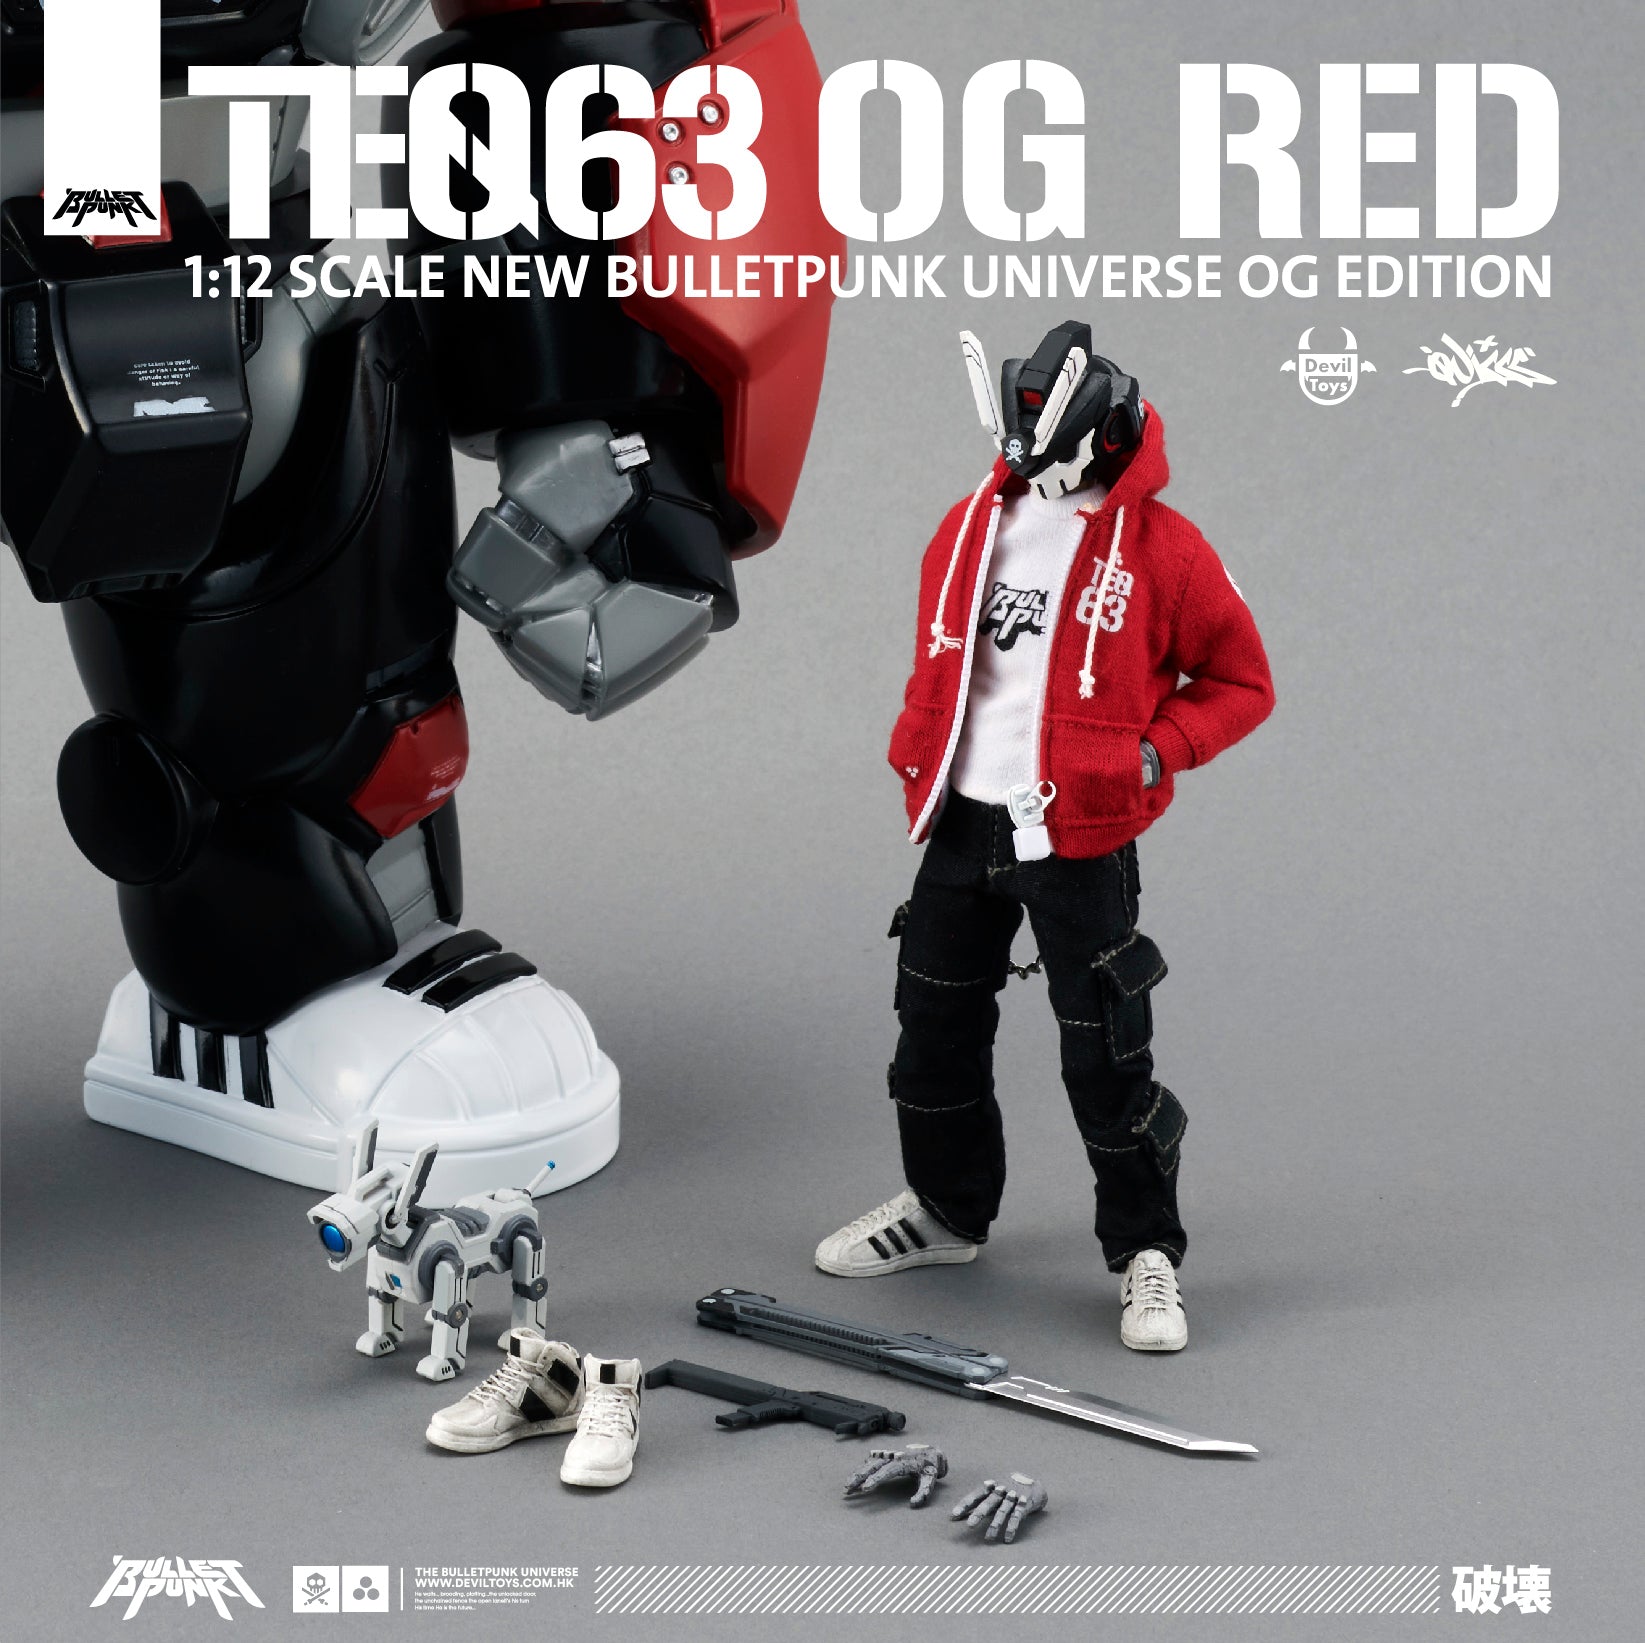 1:12 NUTBUSTER + 1:12 OG Red TEQ63 by Quiccs x Devil Toys - Mecha 